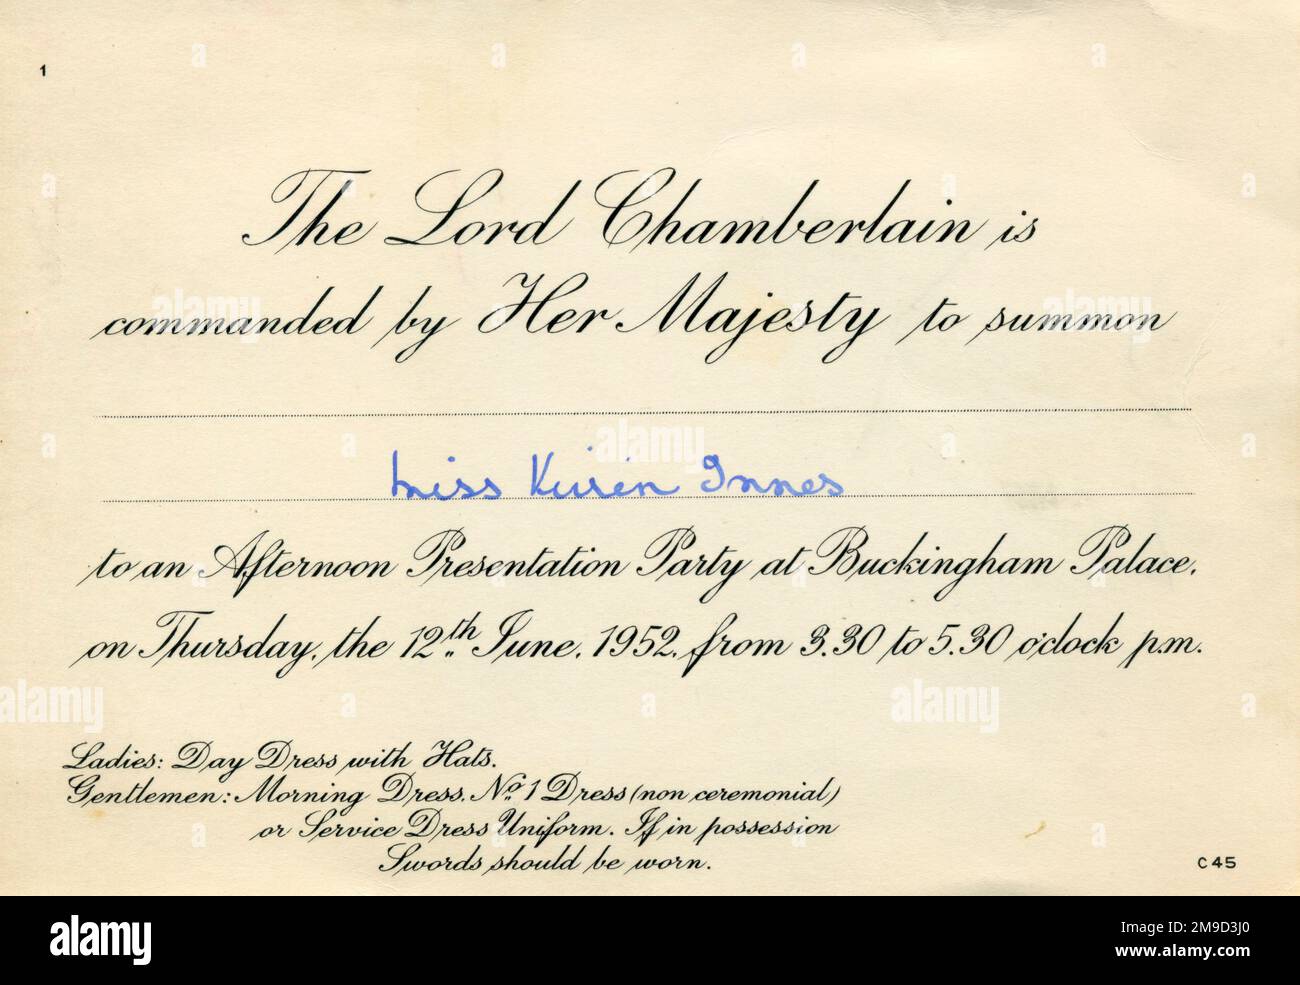 Invitation for a debutante to be presented to the Queen at Buckingham Palace on 12th June 1952.  Whereas in earlier decades, debutantes (society girls 'coming out' in society at the age of 17 or 18) were presented at evening courts, by the 1950s, presentations had become daytime events.  As per the instructions on this card, women were requested to wear day dresses. Stock Photo